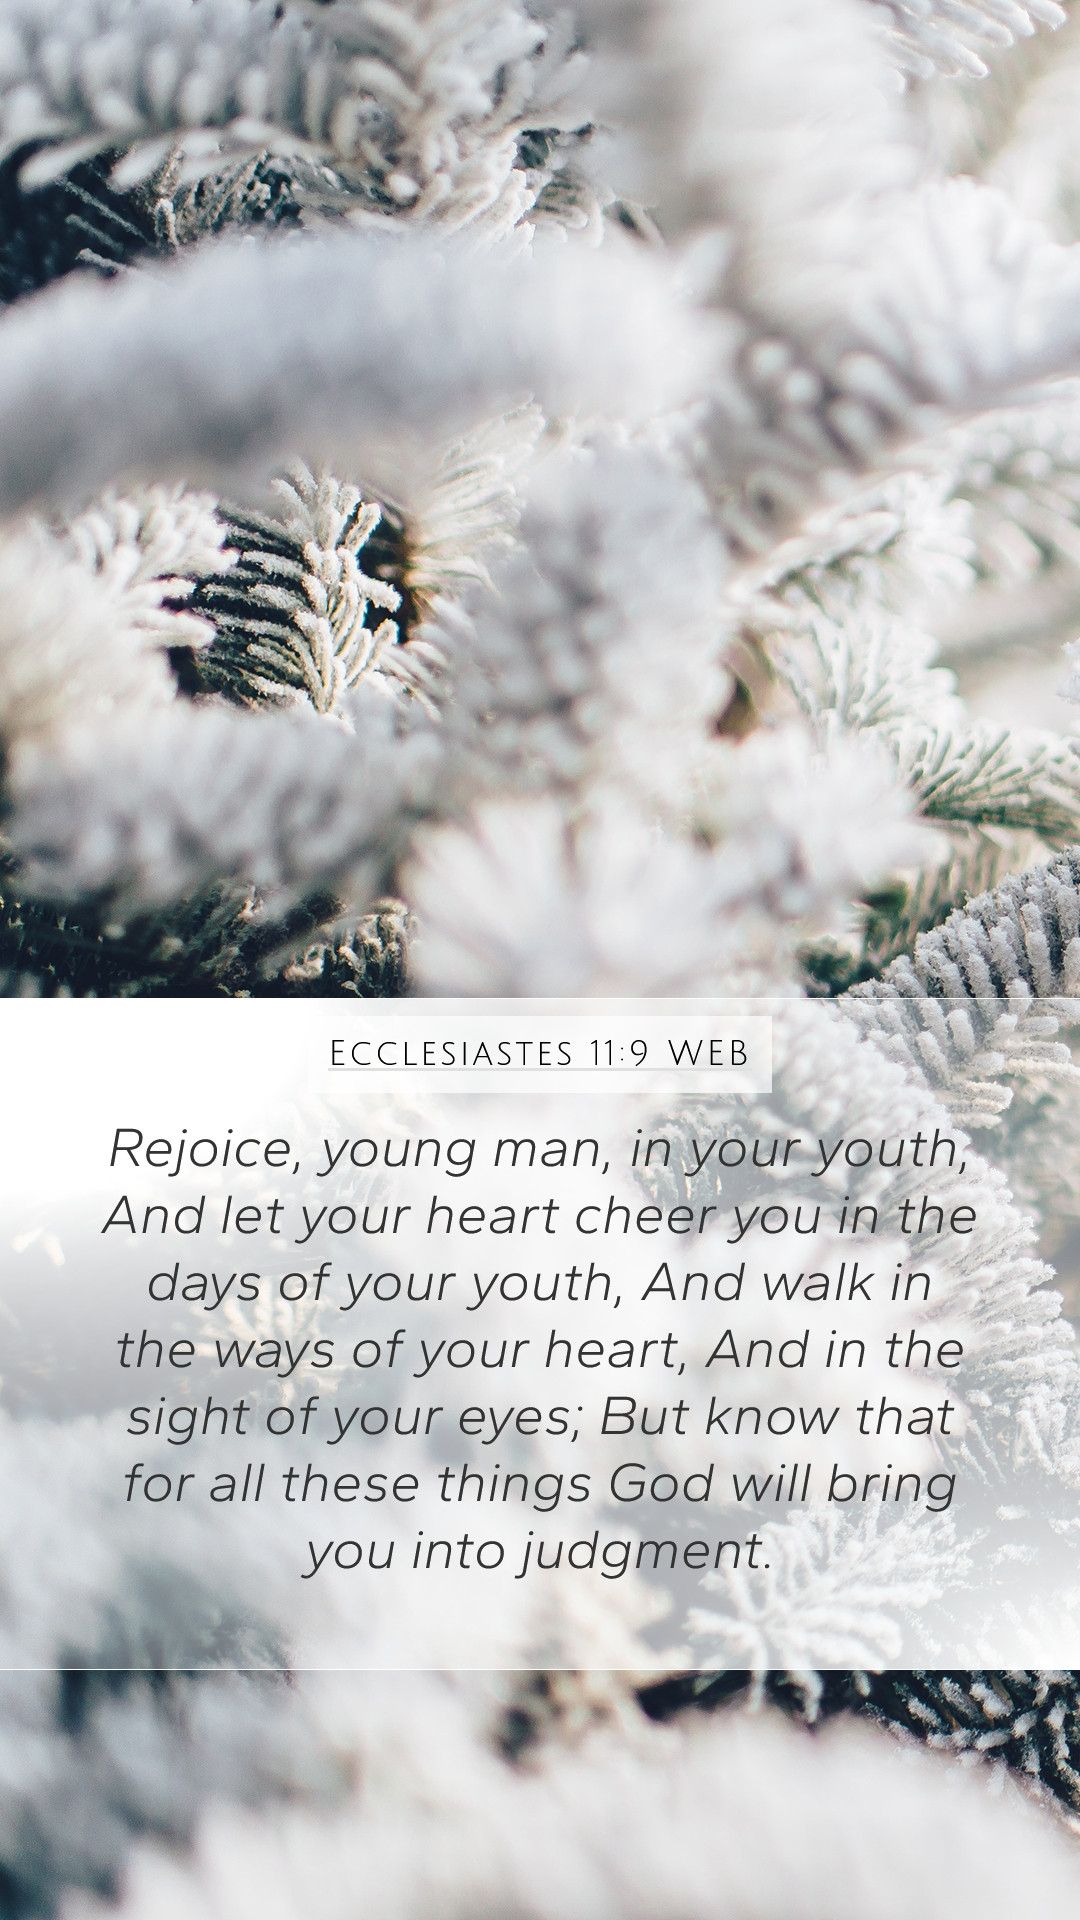 Ecclesiastes 11:9 WEB Mobile Phone Wallpaper, young man, in your youth, And let your